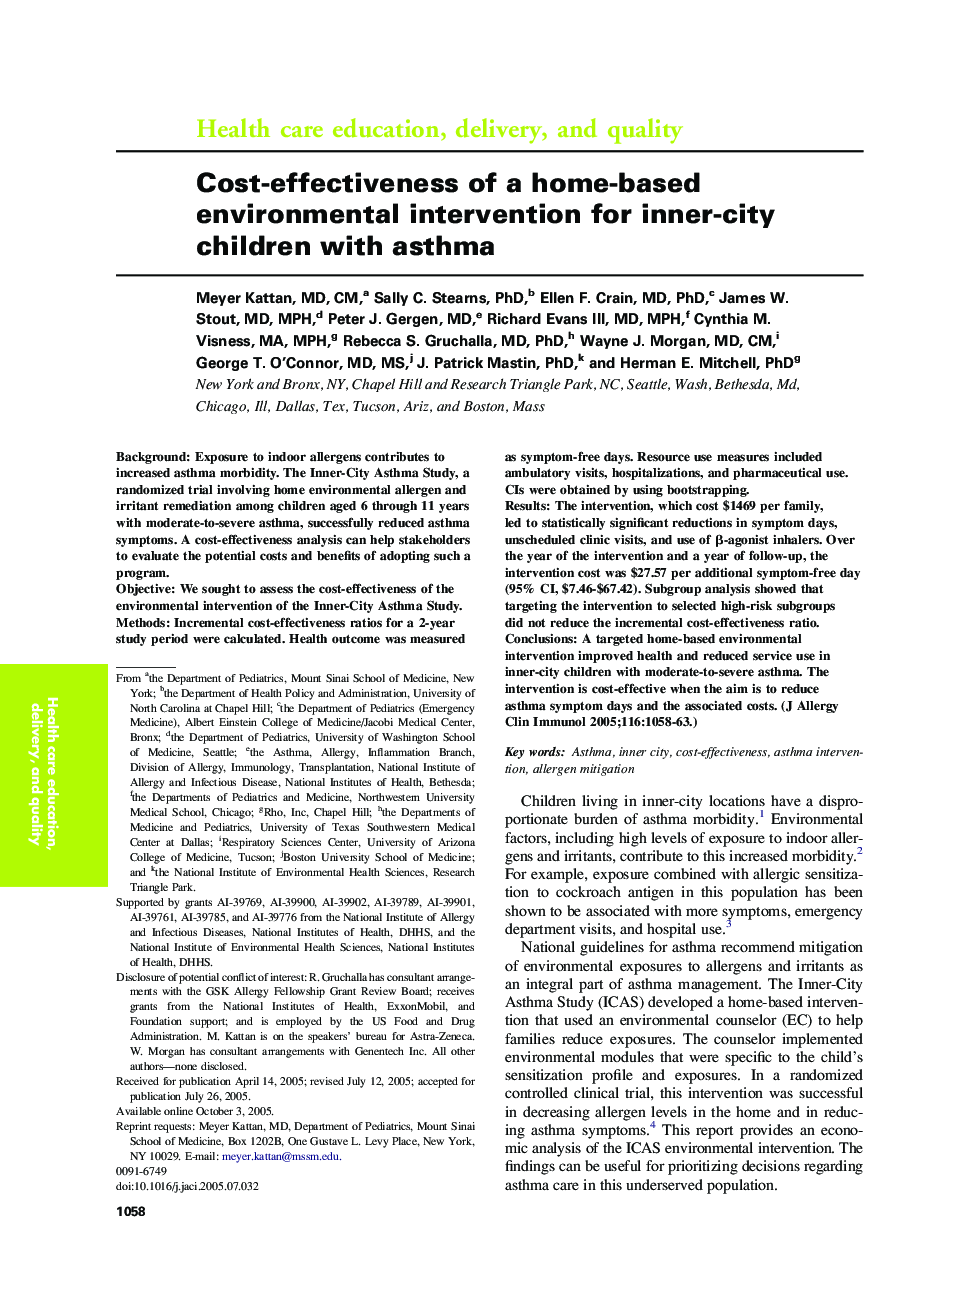 Cost-effectiveness of a home-based environmental intervention for inner-city children with asthma